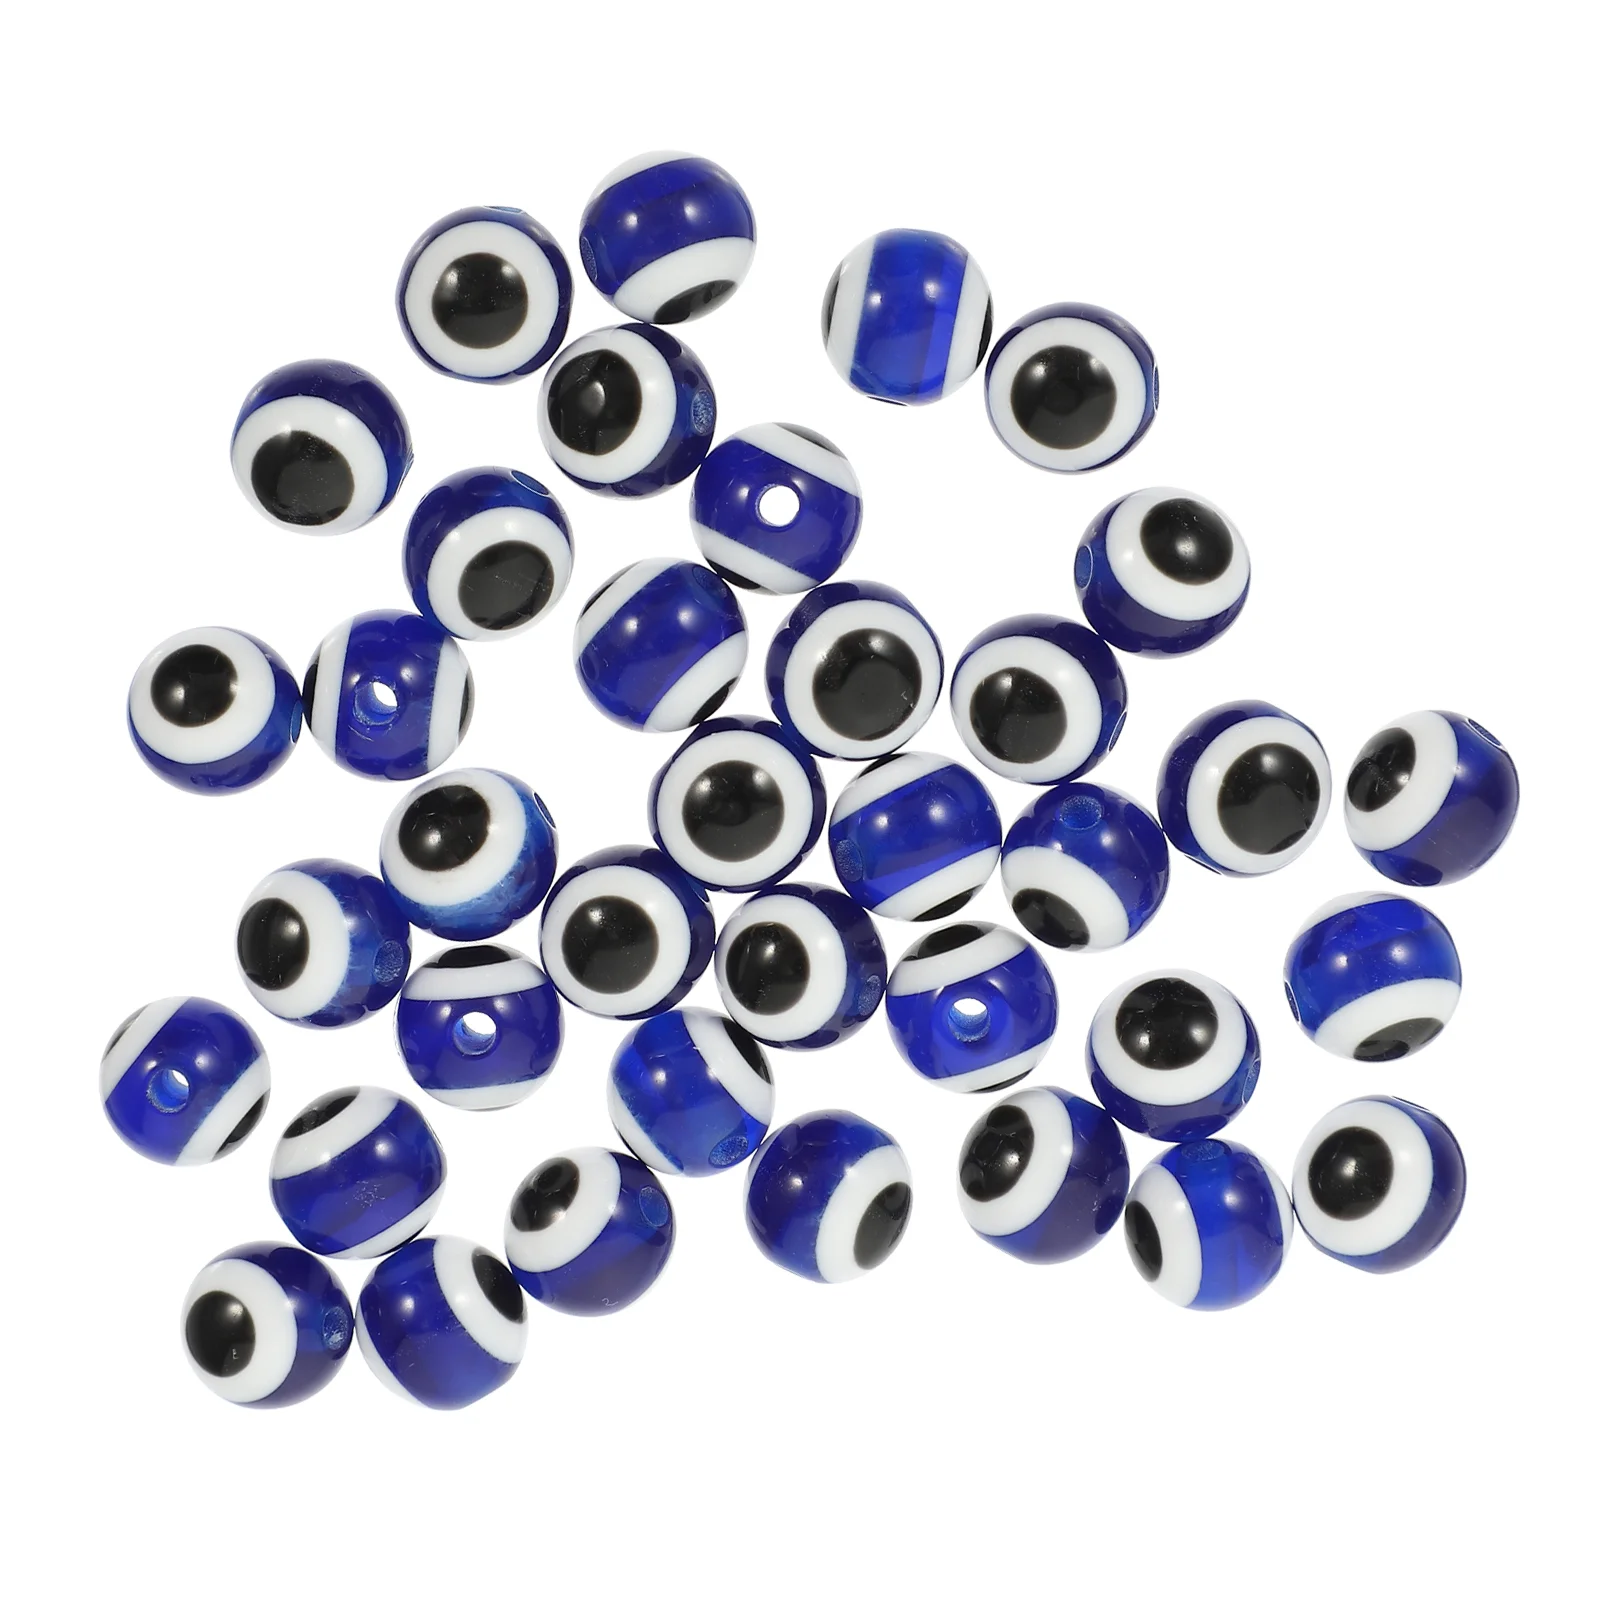 

Eye Beads Evil Charms Turkish Blue Spacer Round Lampwork Jewelry Making Loose Pendant Prayer Connector Lucky Charm Greek Luck